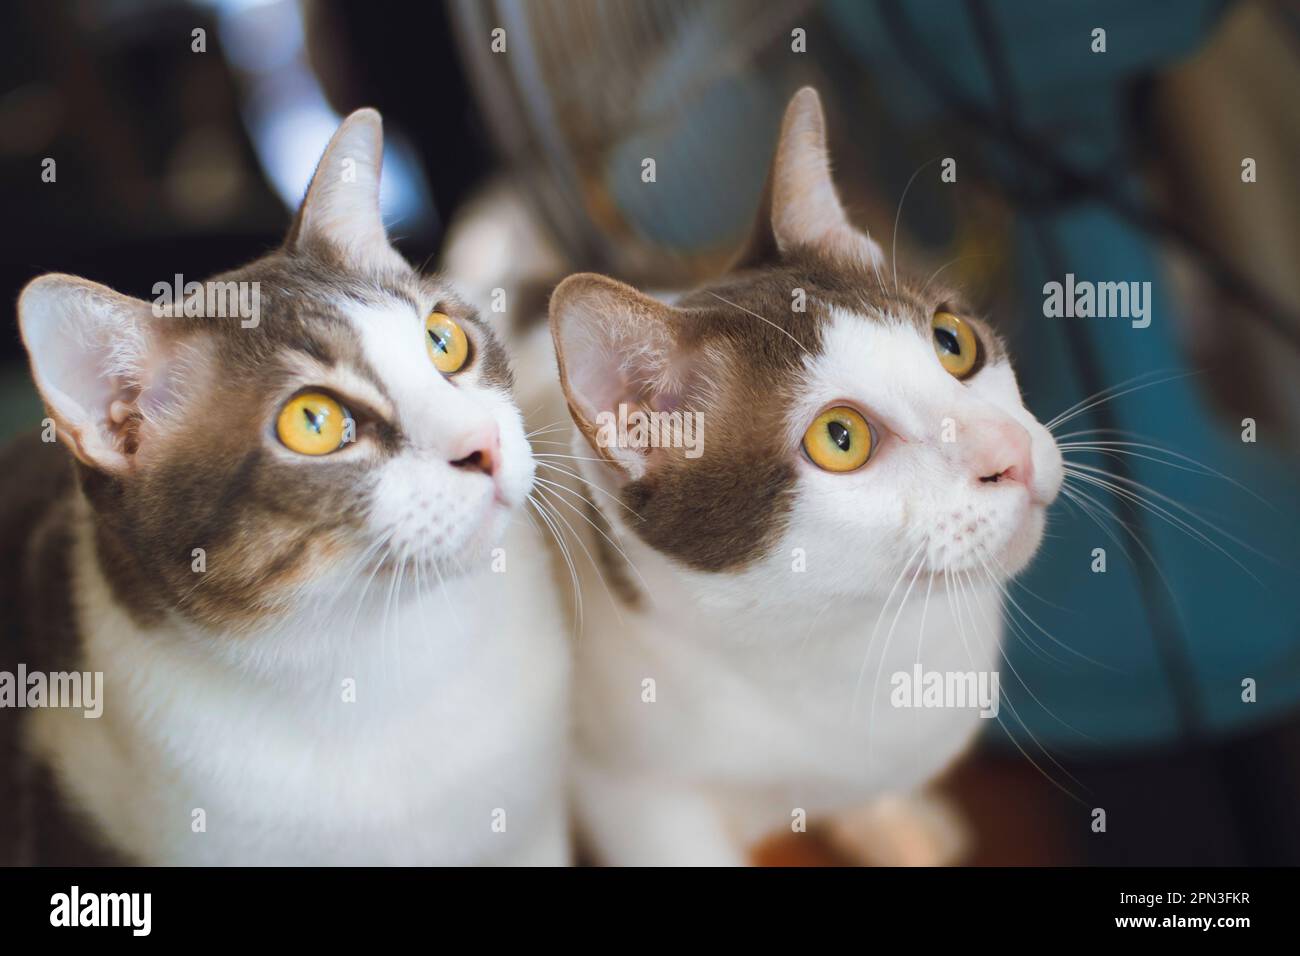 Two tabby cats looking up with excitement Stock Photo